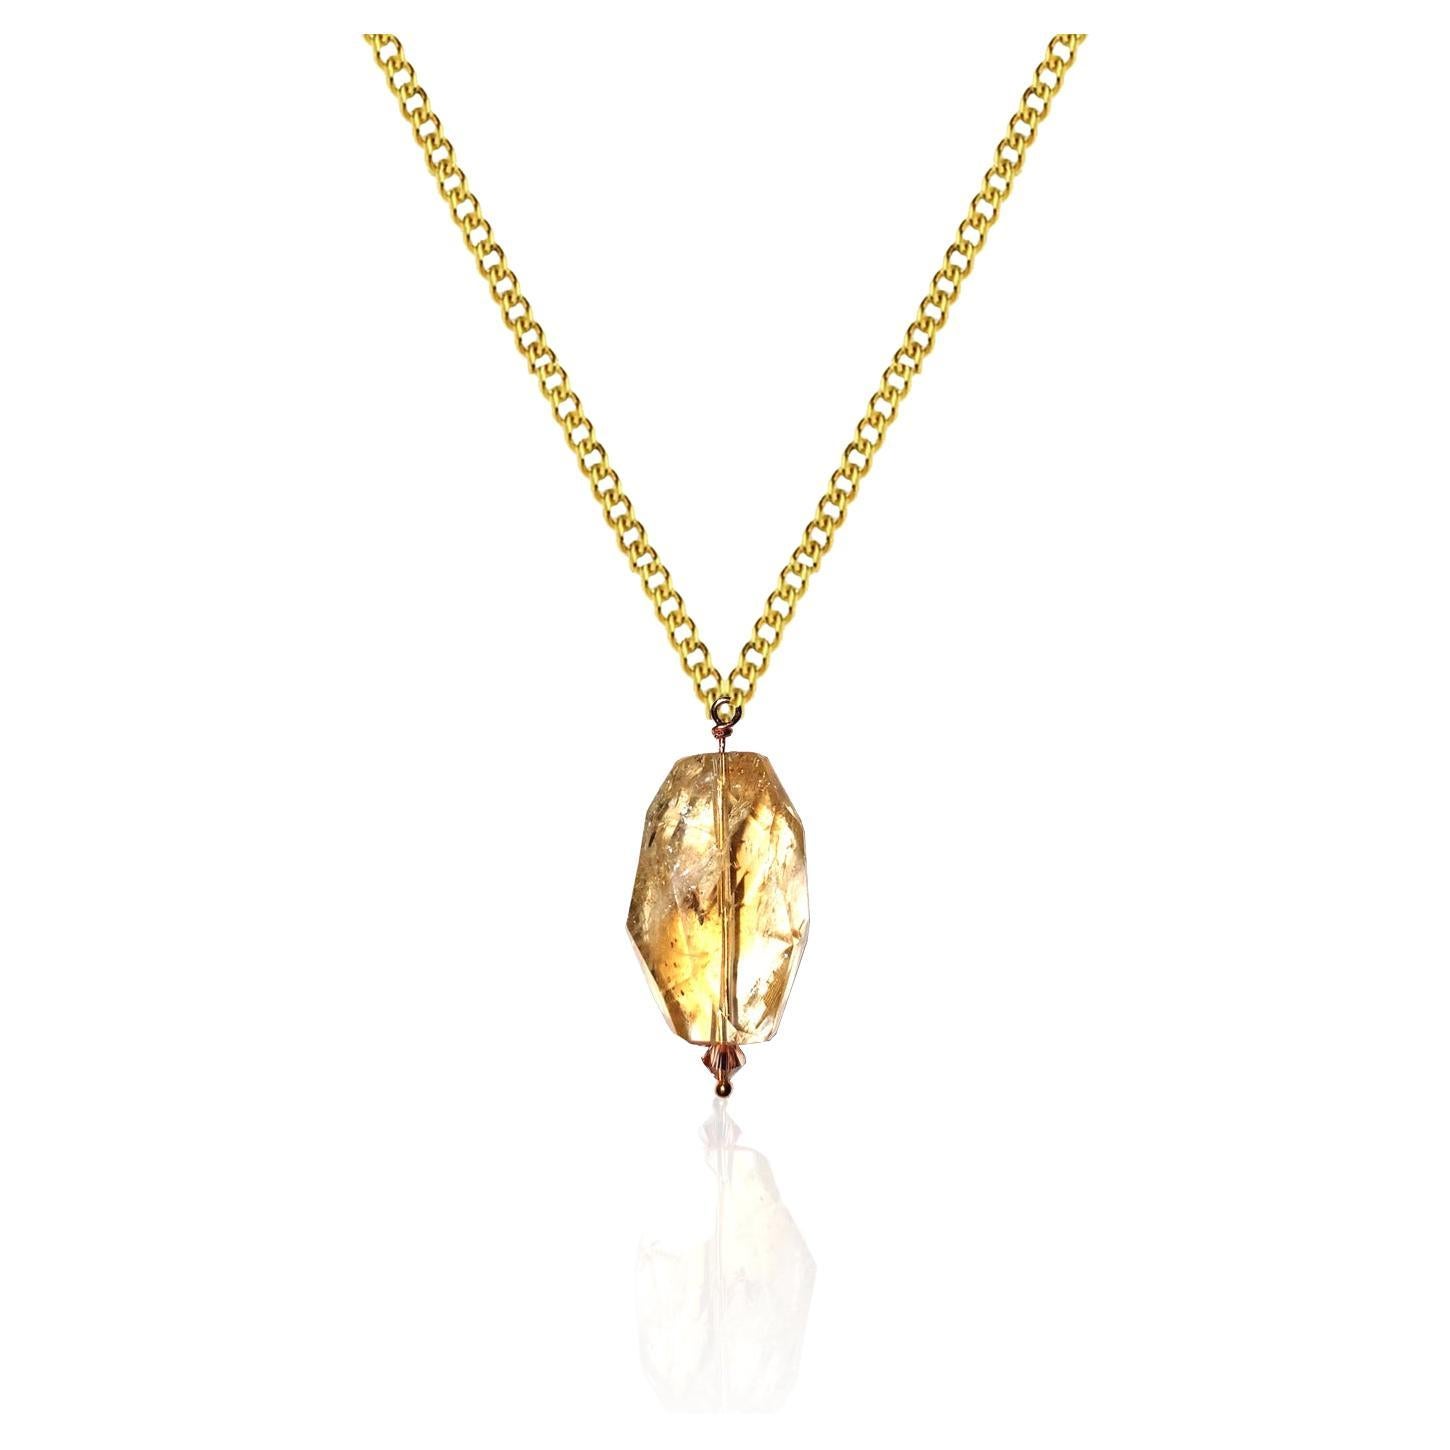 Amber 9 Carat Yellow Gold Pendant Necklace